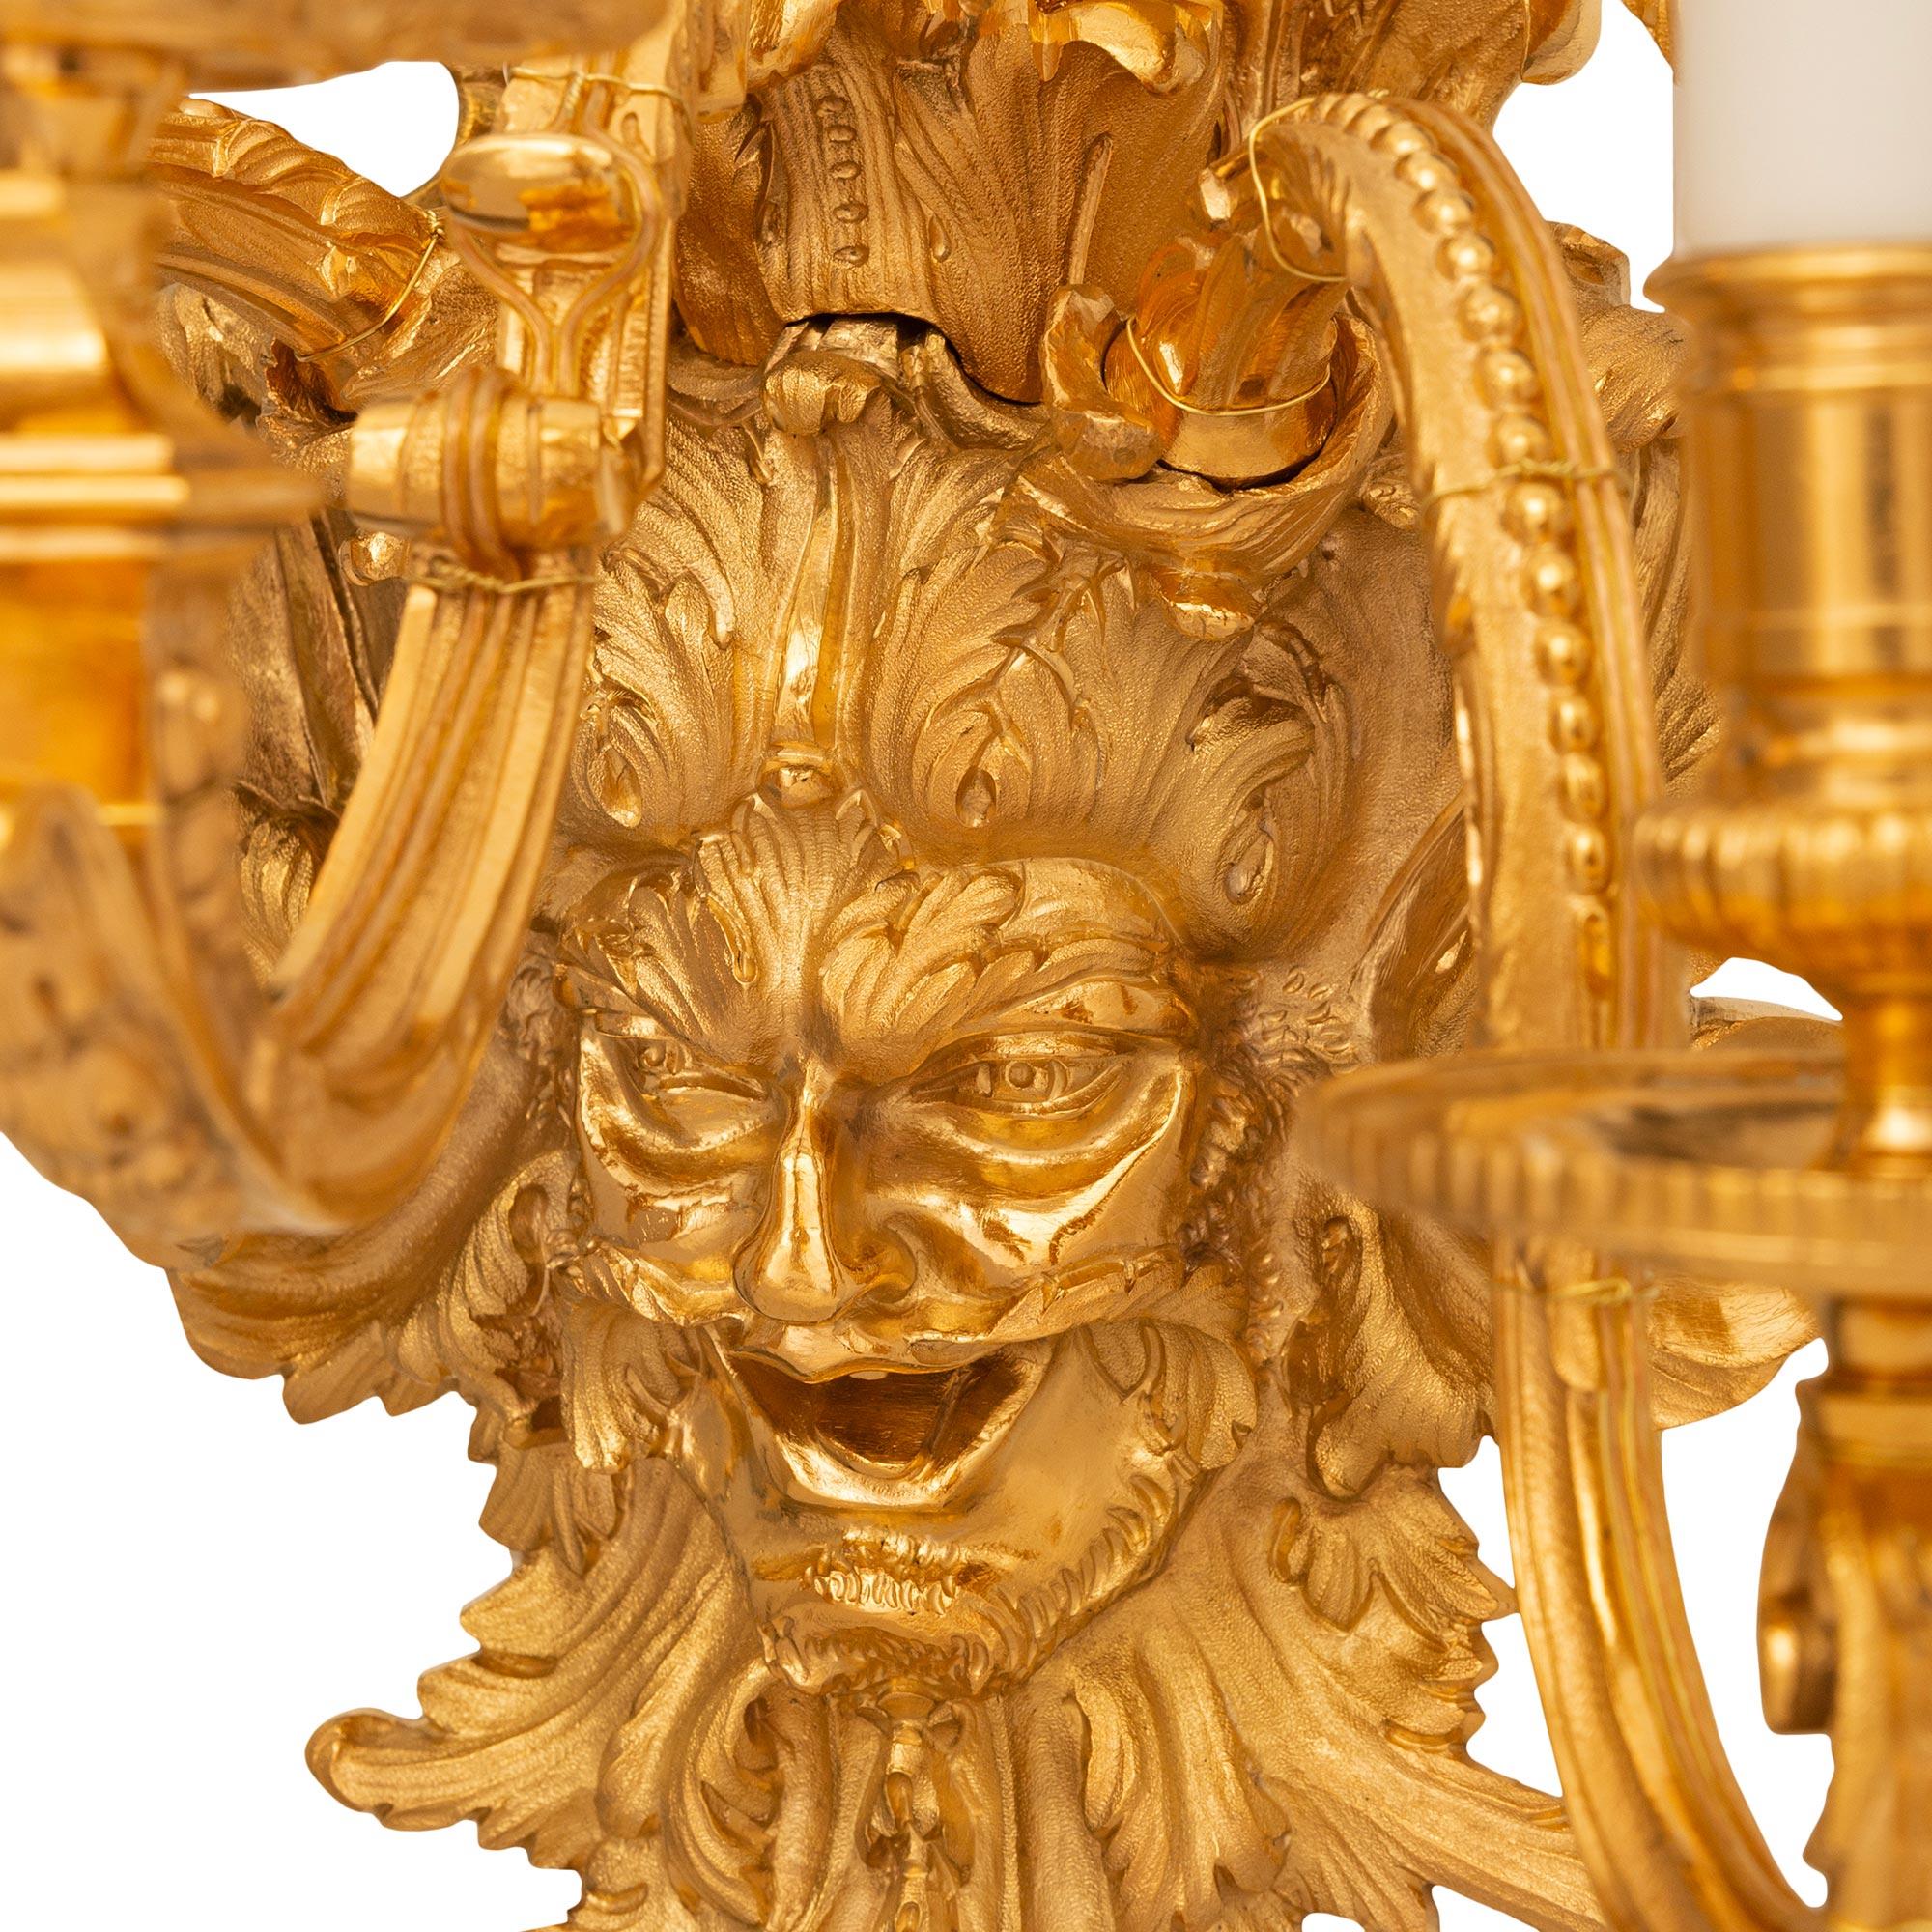 A high quality and stunning pair of French 19th century Louis XVI st. Ormolu sconces. Each beautiful five arm sconce is centered by a richly chased and wonderfully detailed grotesque mask containing scrolling foliate designs and an excited